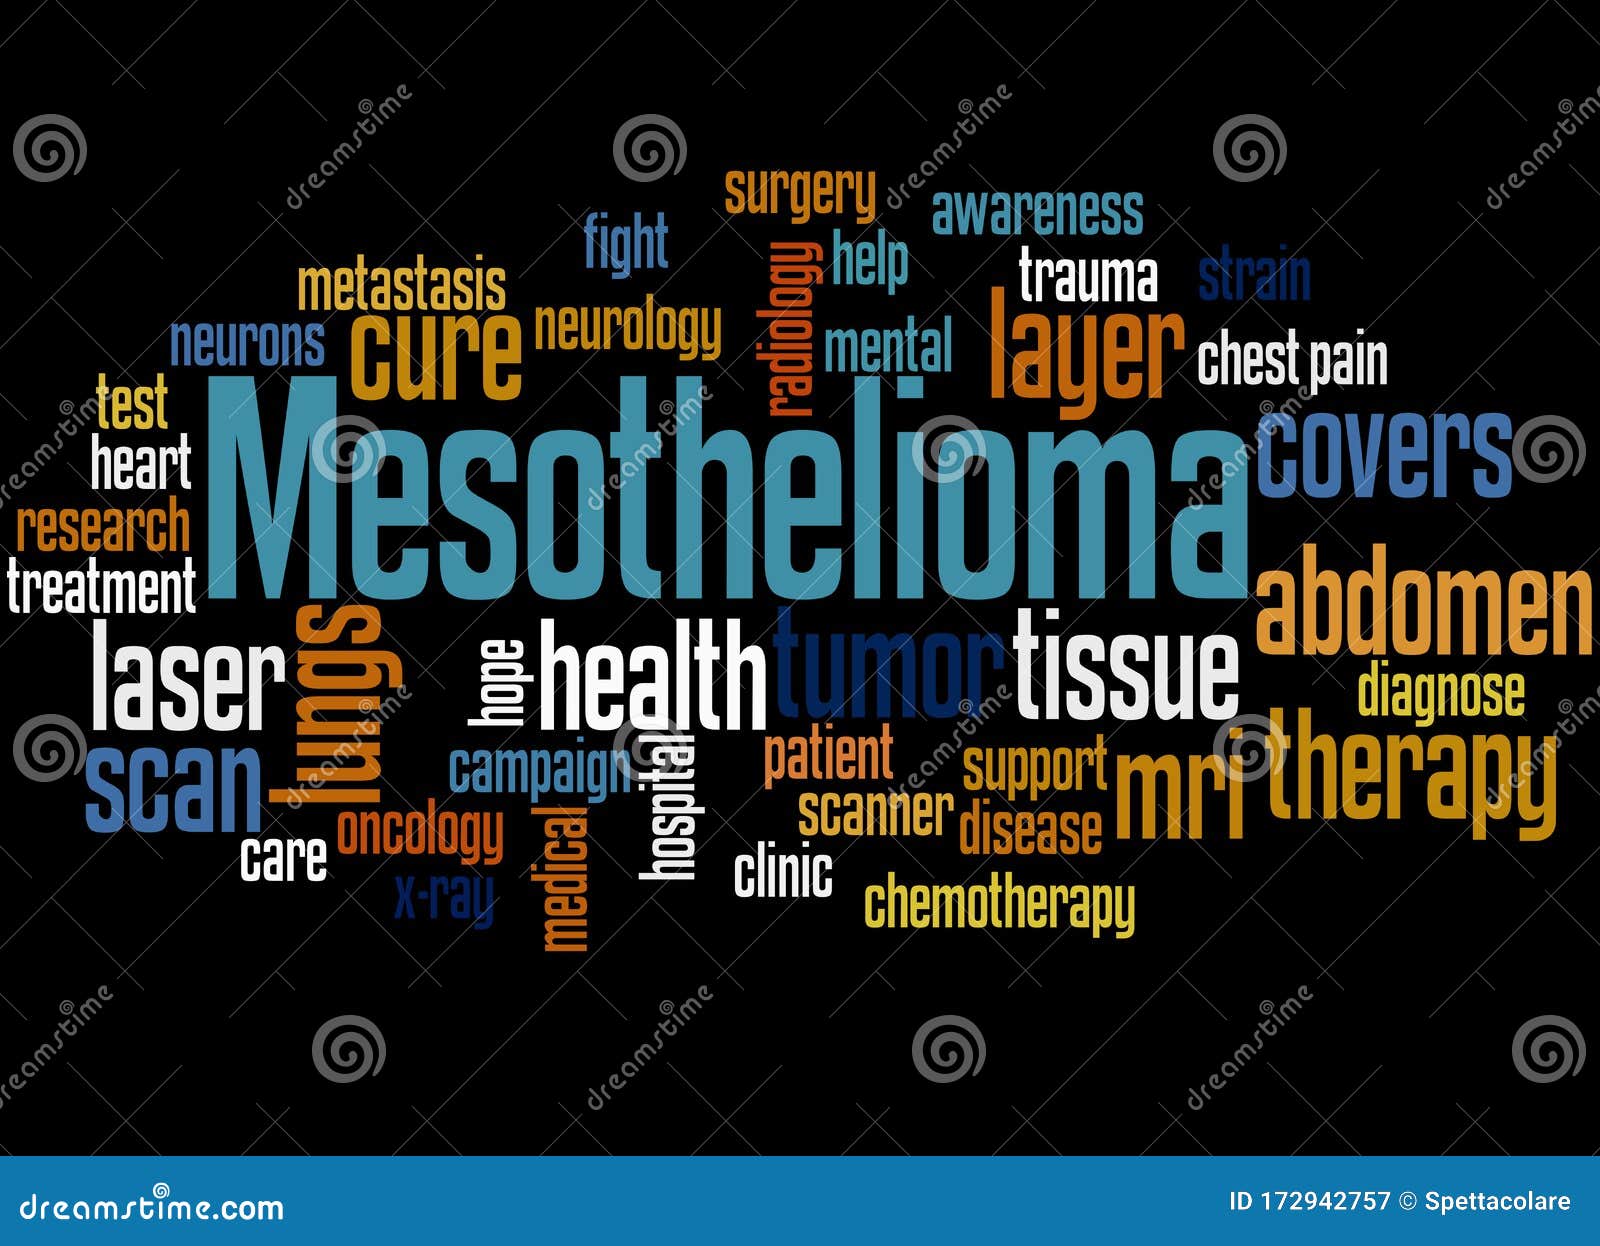 what parts of the body are affected by mesothelioma